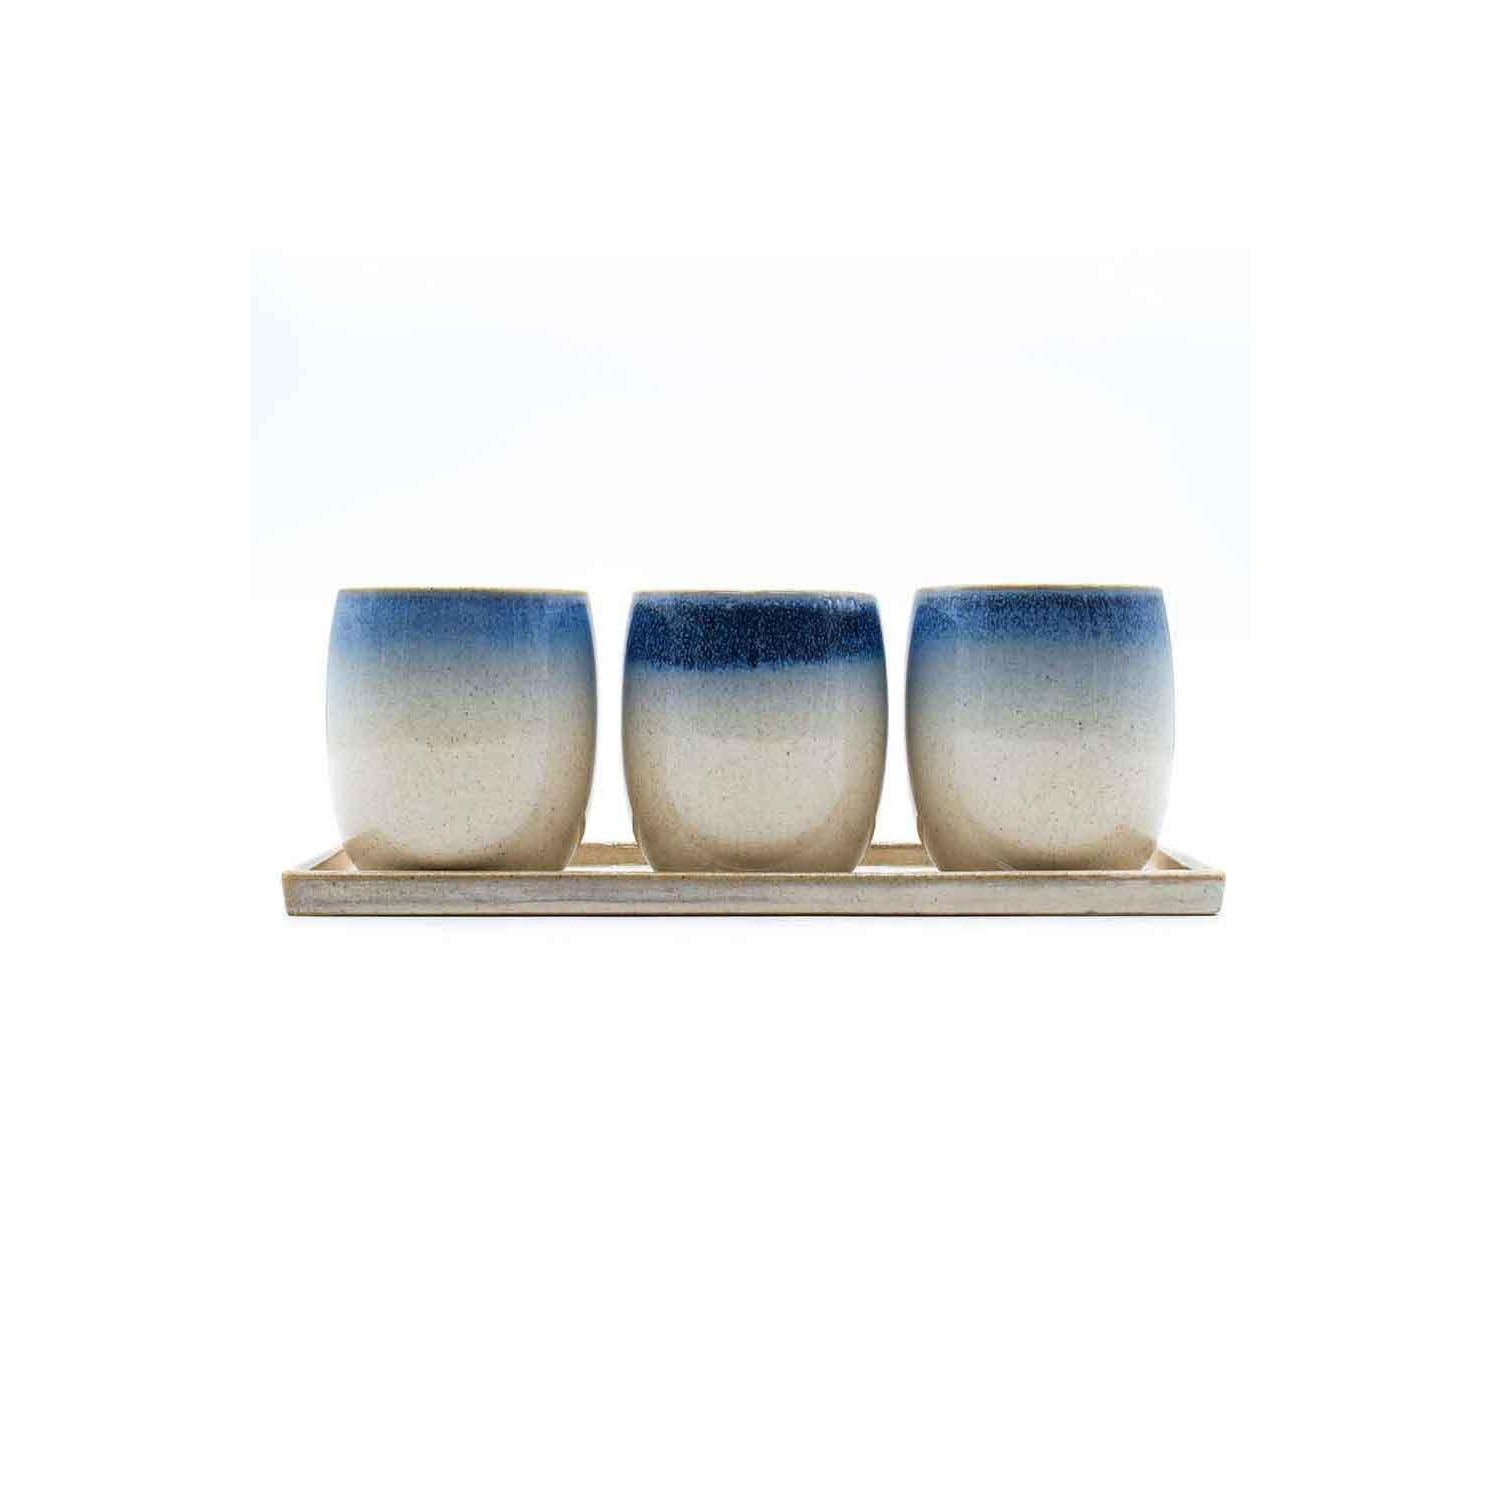 Set of 3 Blue and Cream Reactive Glazed Ceramic Planters with Tray - image 1